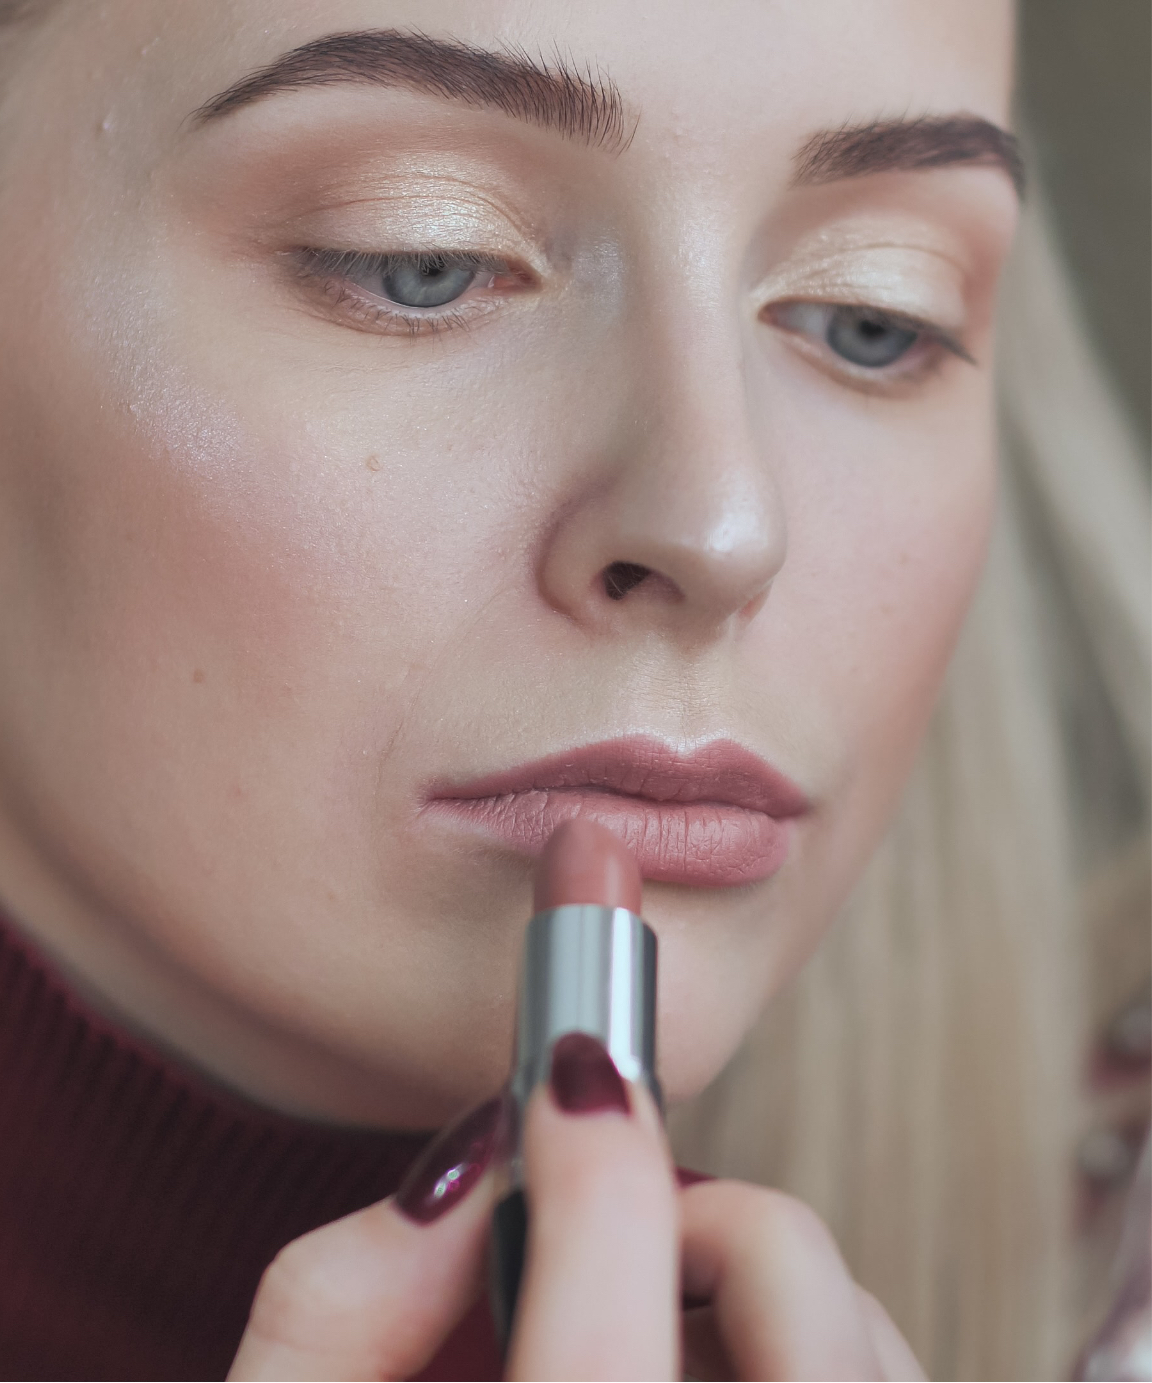 Woman with dull lip color applying lipstick